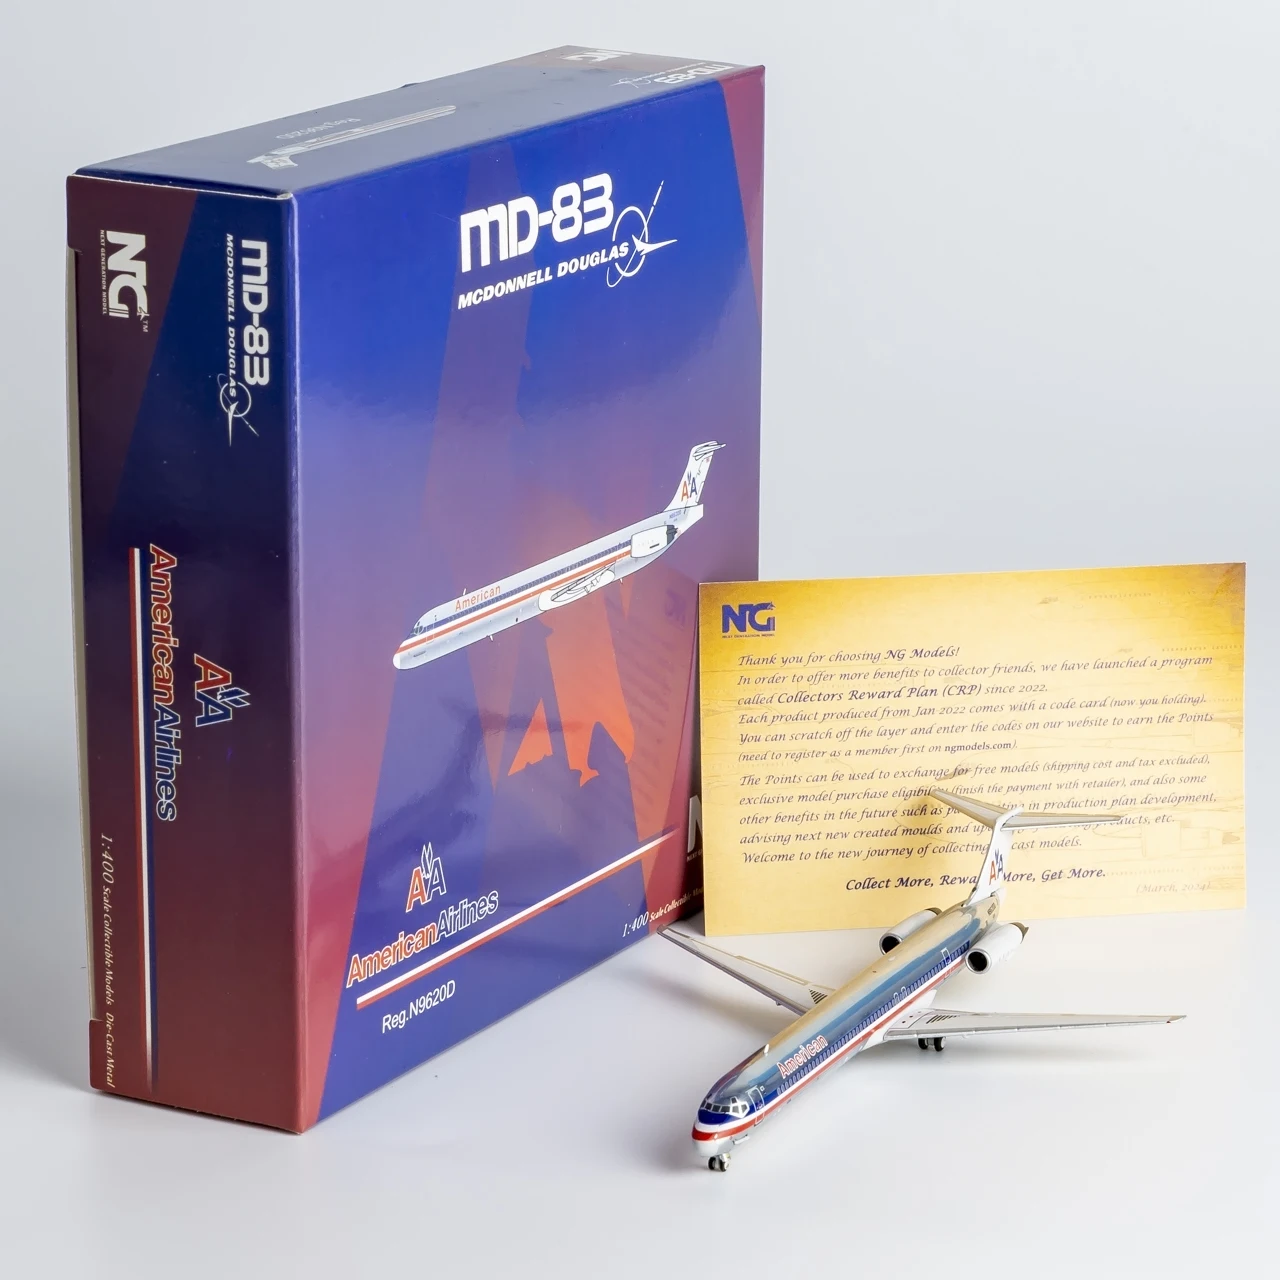 

83002 Alloy Collectible Plane Gift NG Model 1:400 American Airlines McDonnell Douglas MD-83 Diecast Aircraft Jet Model N9620D